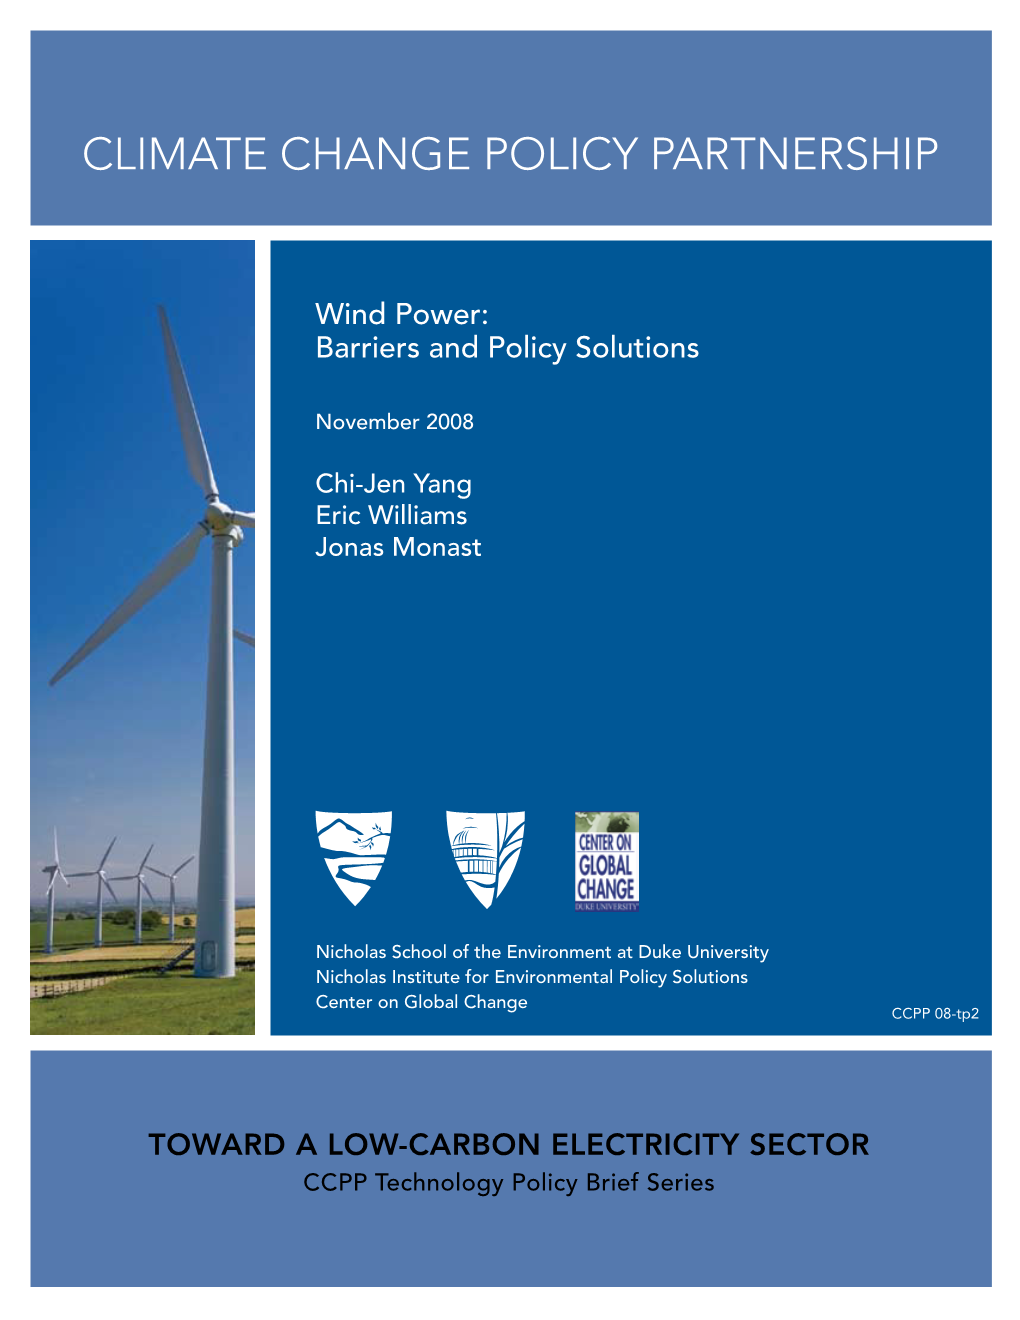 Wind Power: Barriers and Policy Solutions